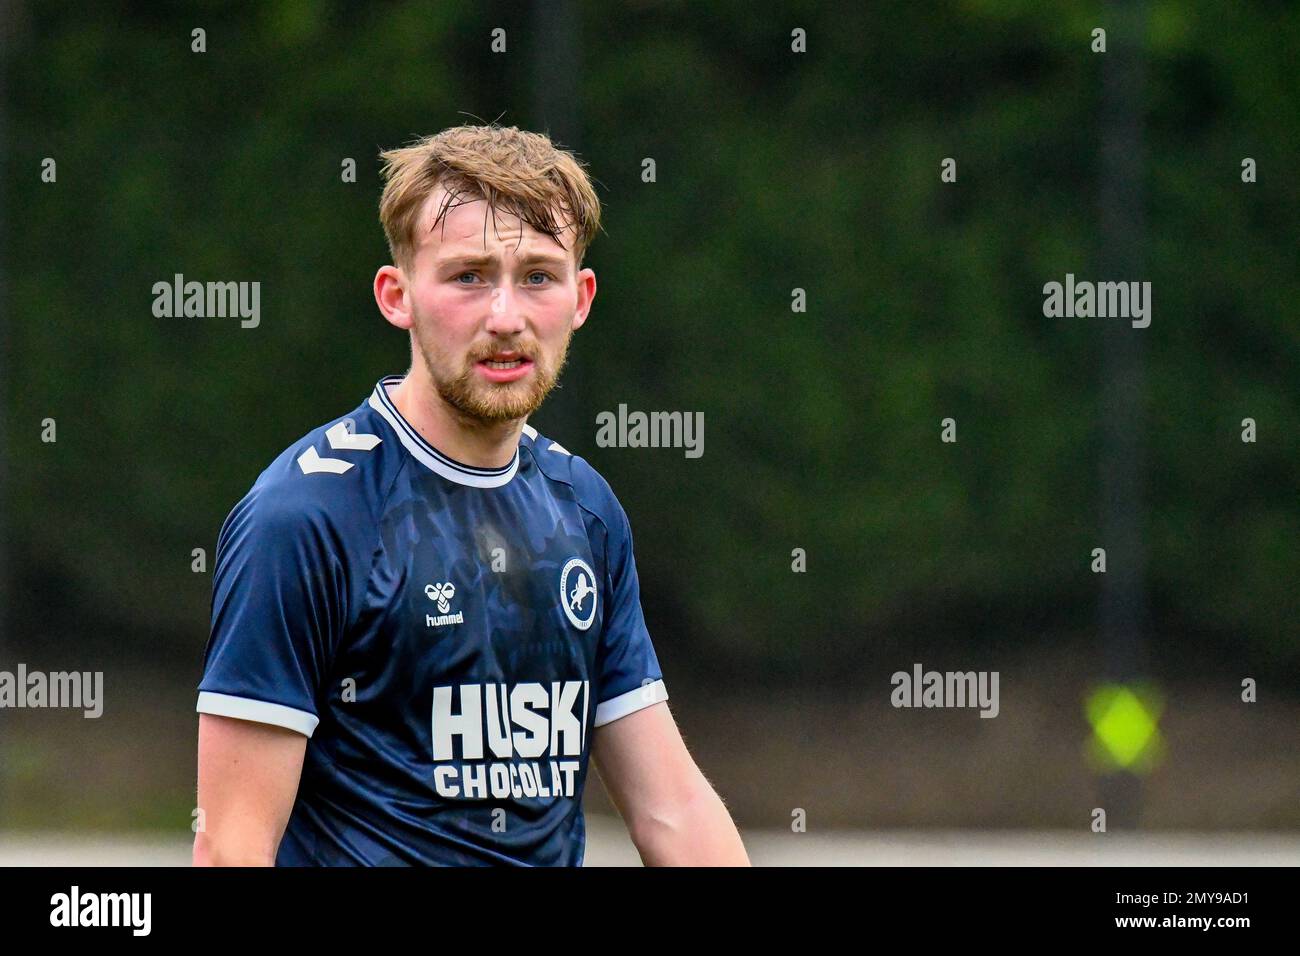 Swansea, Wales. 4 February 2023. Ernie Cheeseman of Millwall during the Professional Development League game between Swansea City Under 18 and Millwall Under 18 at the Swansea City Academy in Swansea, Wales, UK on 4 February 2023. Credit: Duncan Thomas/Majestic Media. Stock Photo